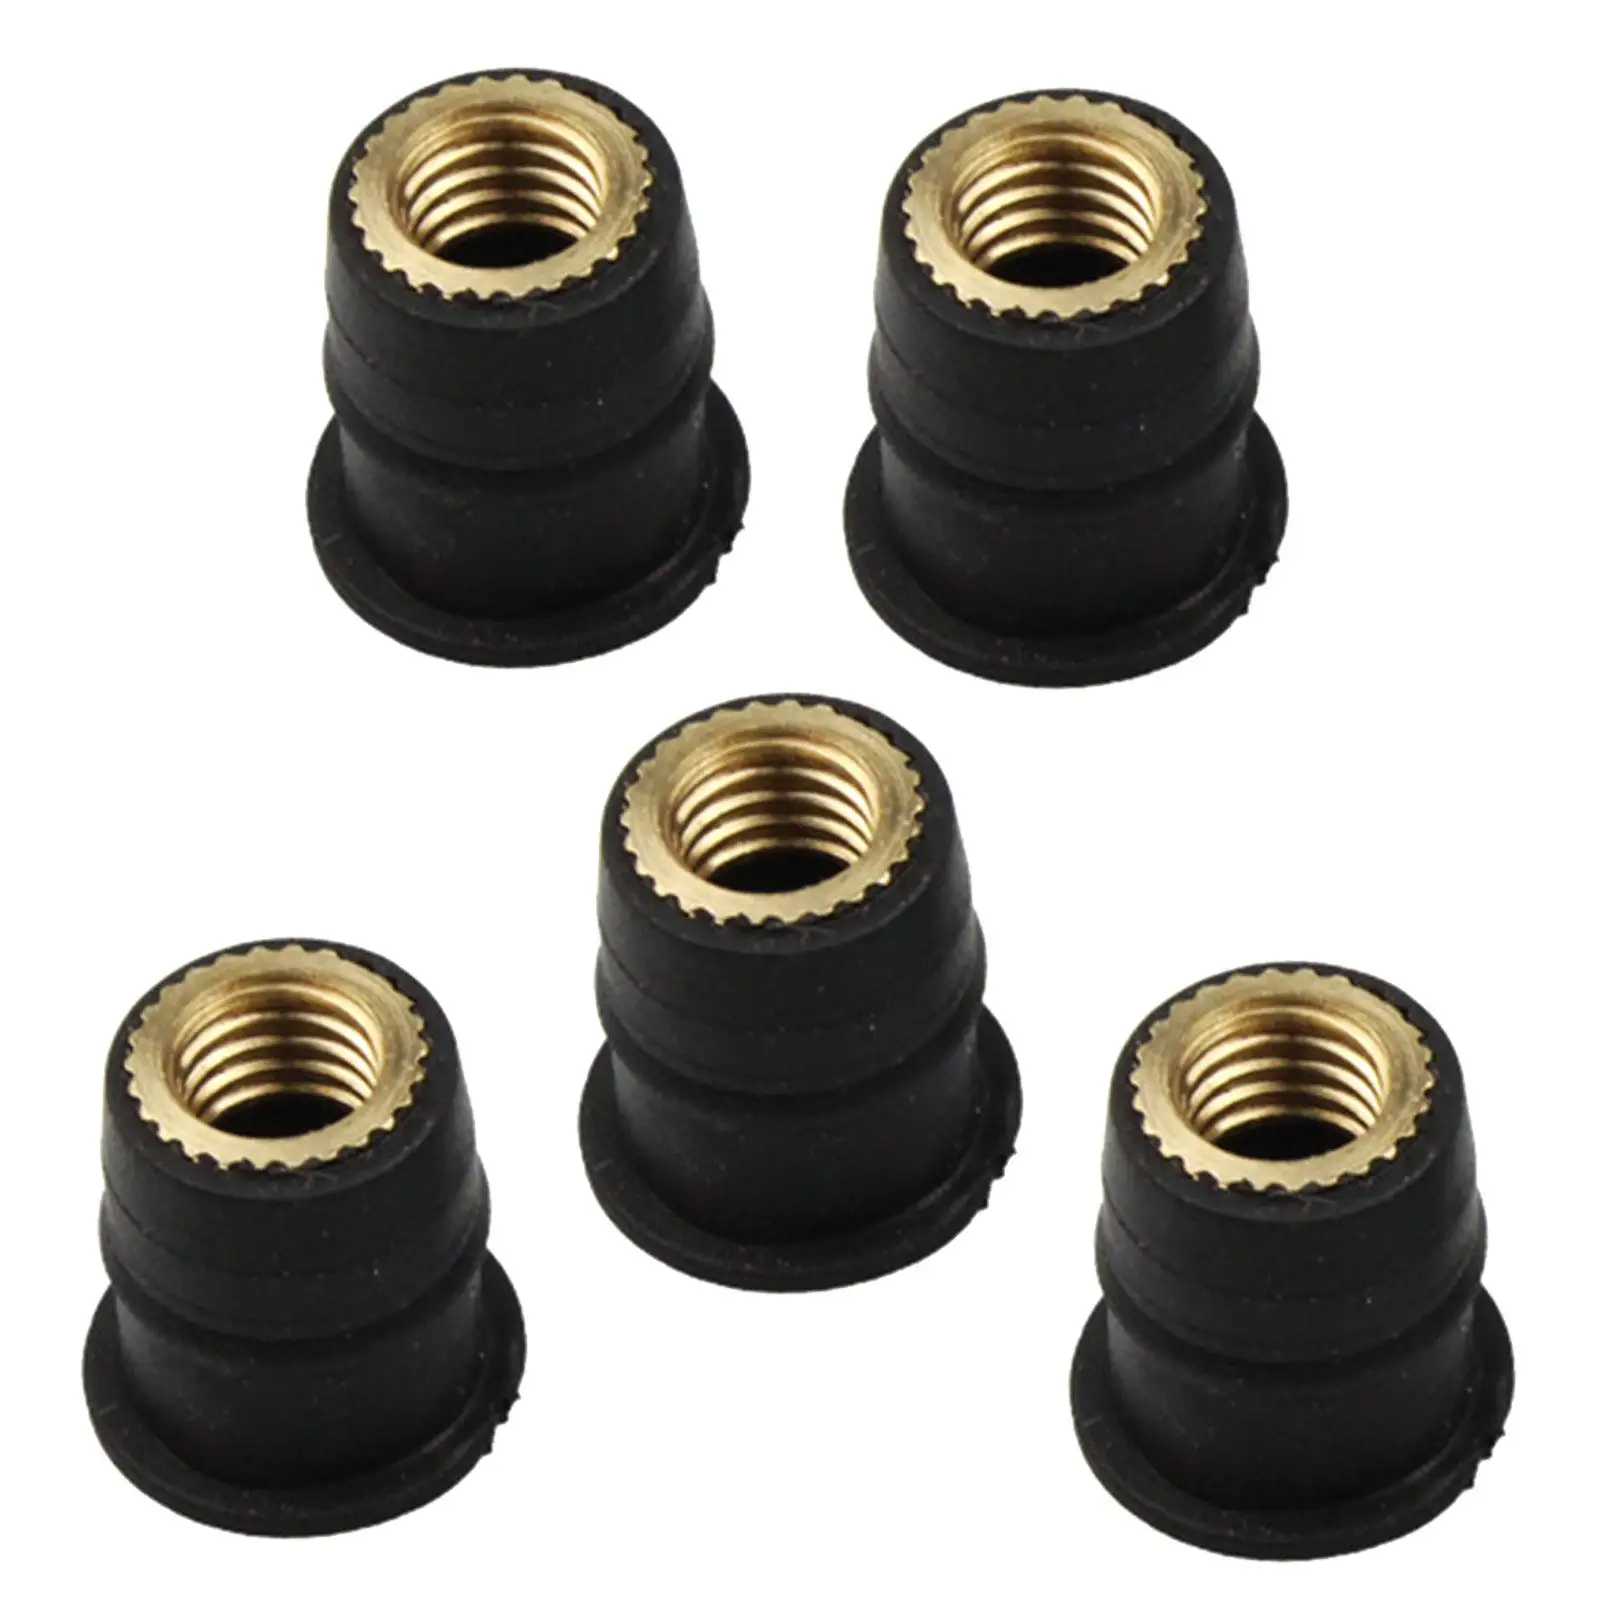 5x Windshield Well Nut Motorcycle Accessories Brass Nut for Kayak Canoe